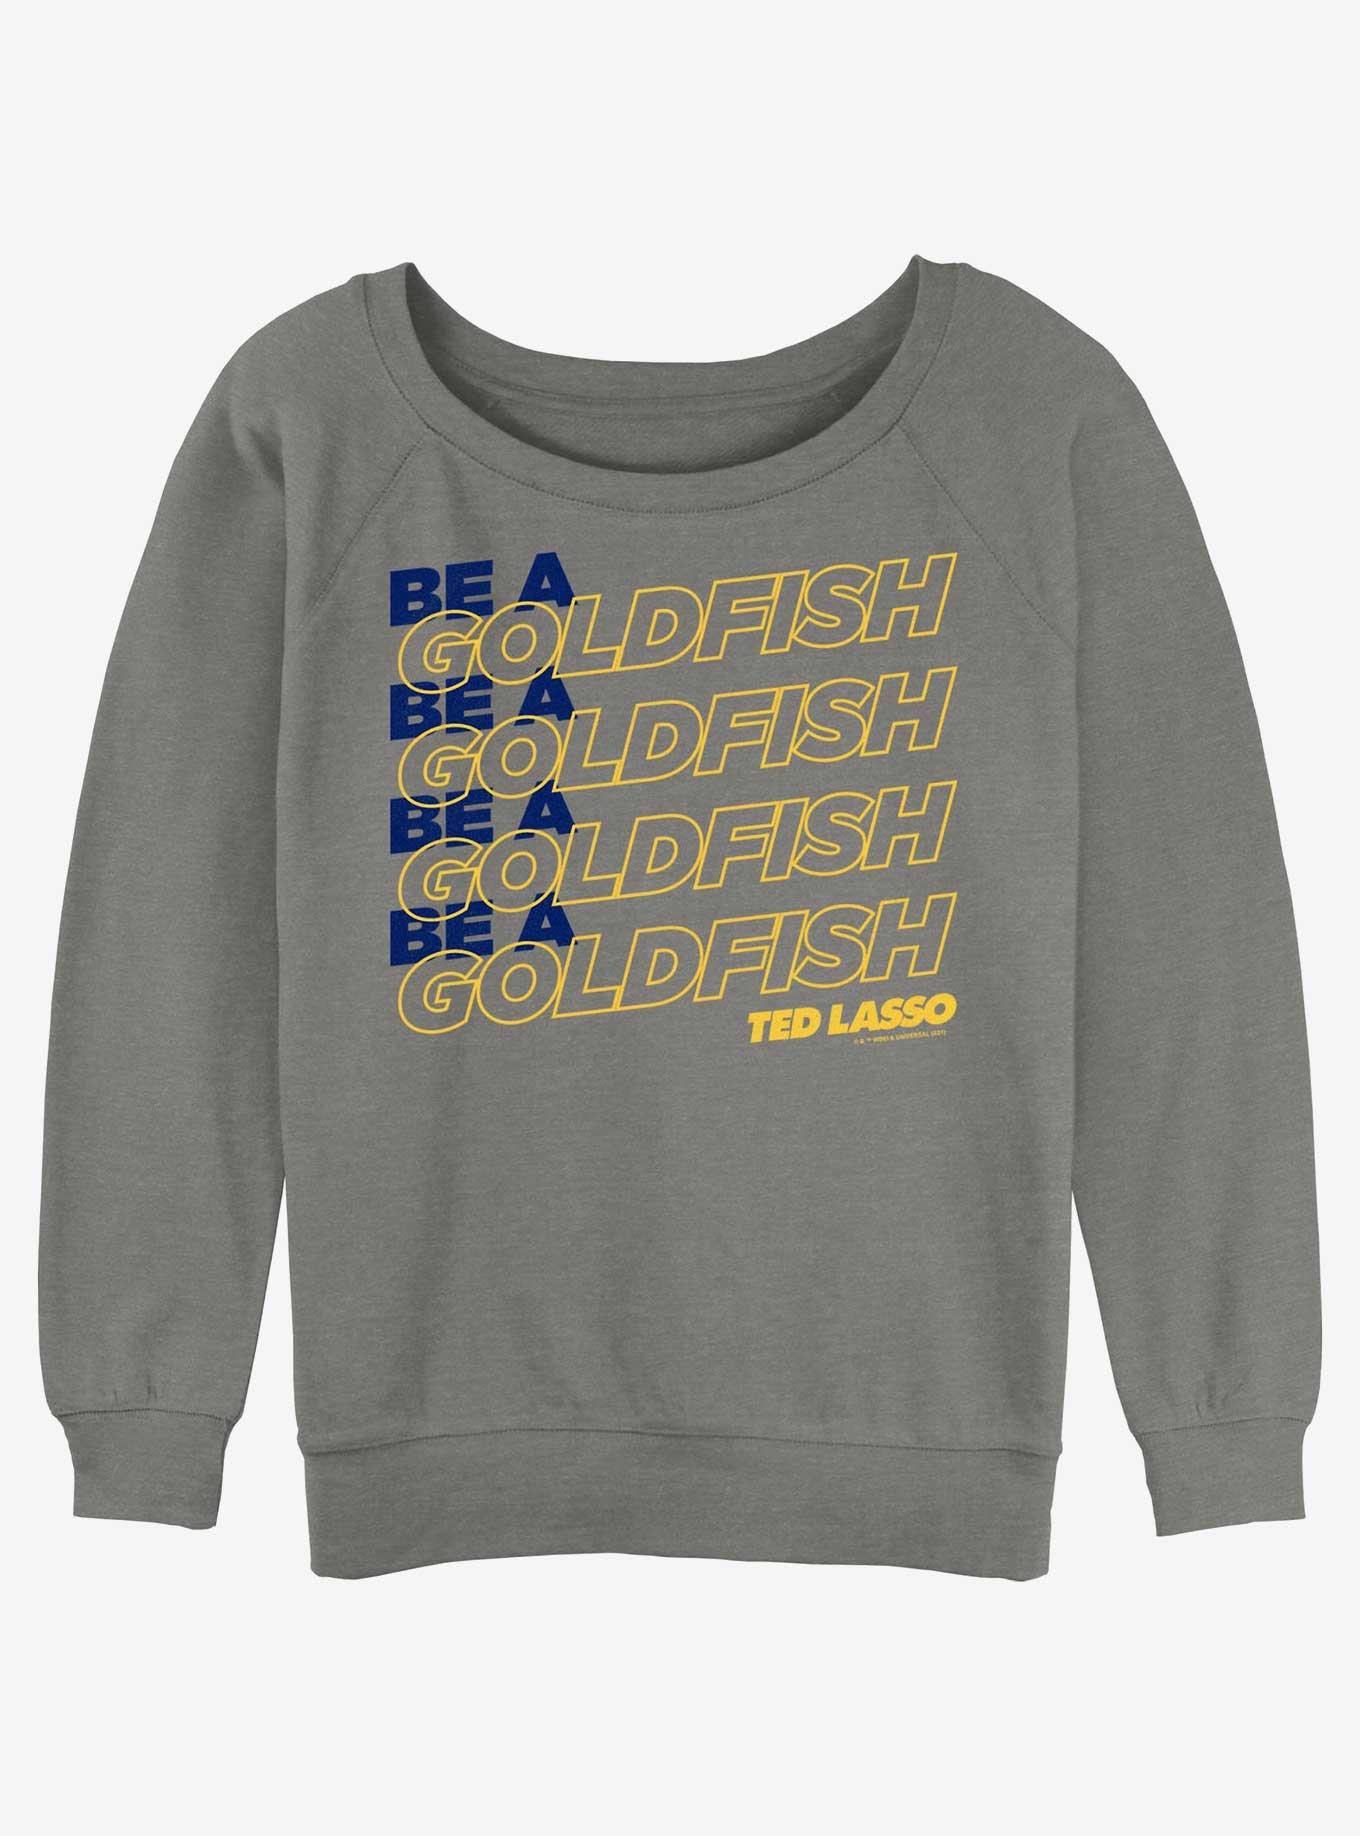 Ted Lasso Be A Goldfish Girls Slouchy Sweatshirt, GRAY HTR, hi-res